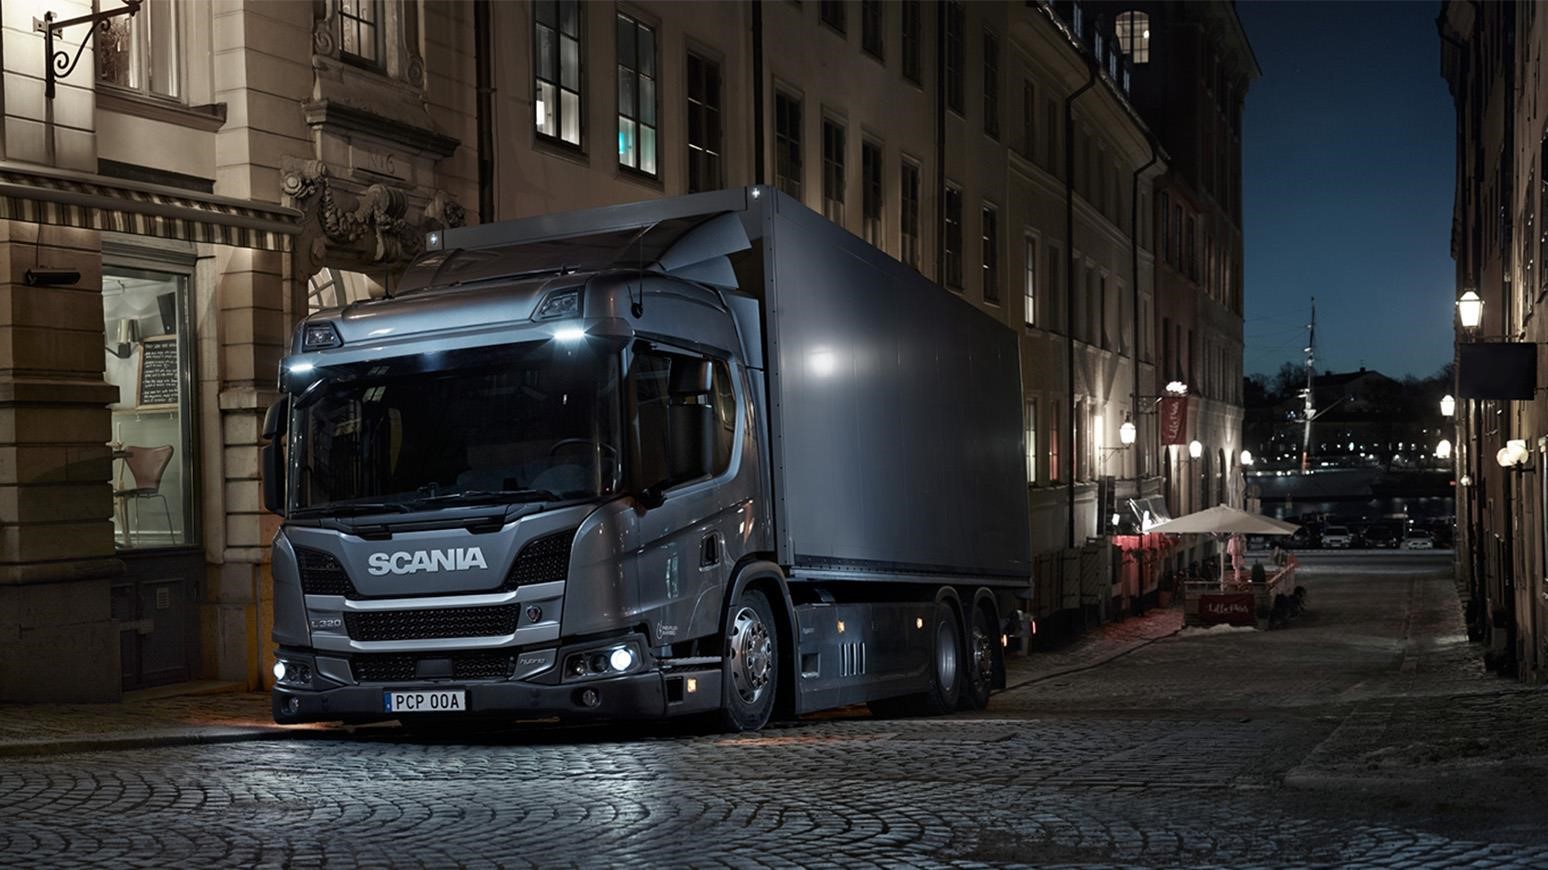 Scania L 320 Hybrid Truck Wins Vado e Torno’s Sustainable Truck Of The Year Award In Italy